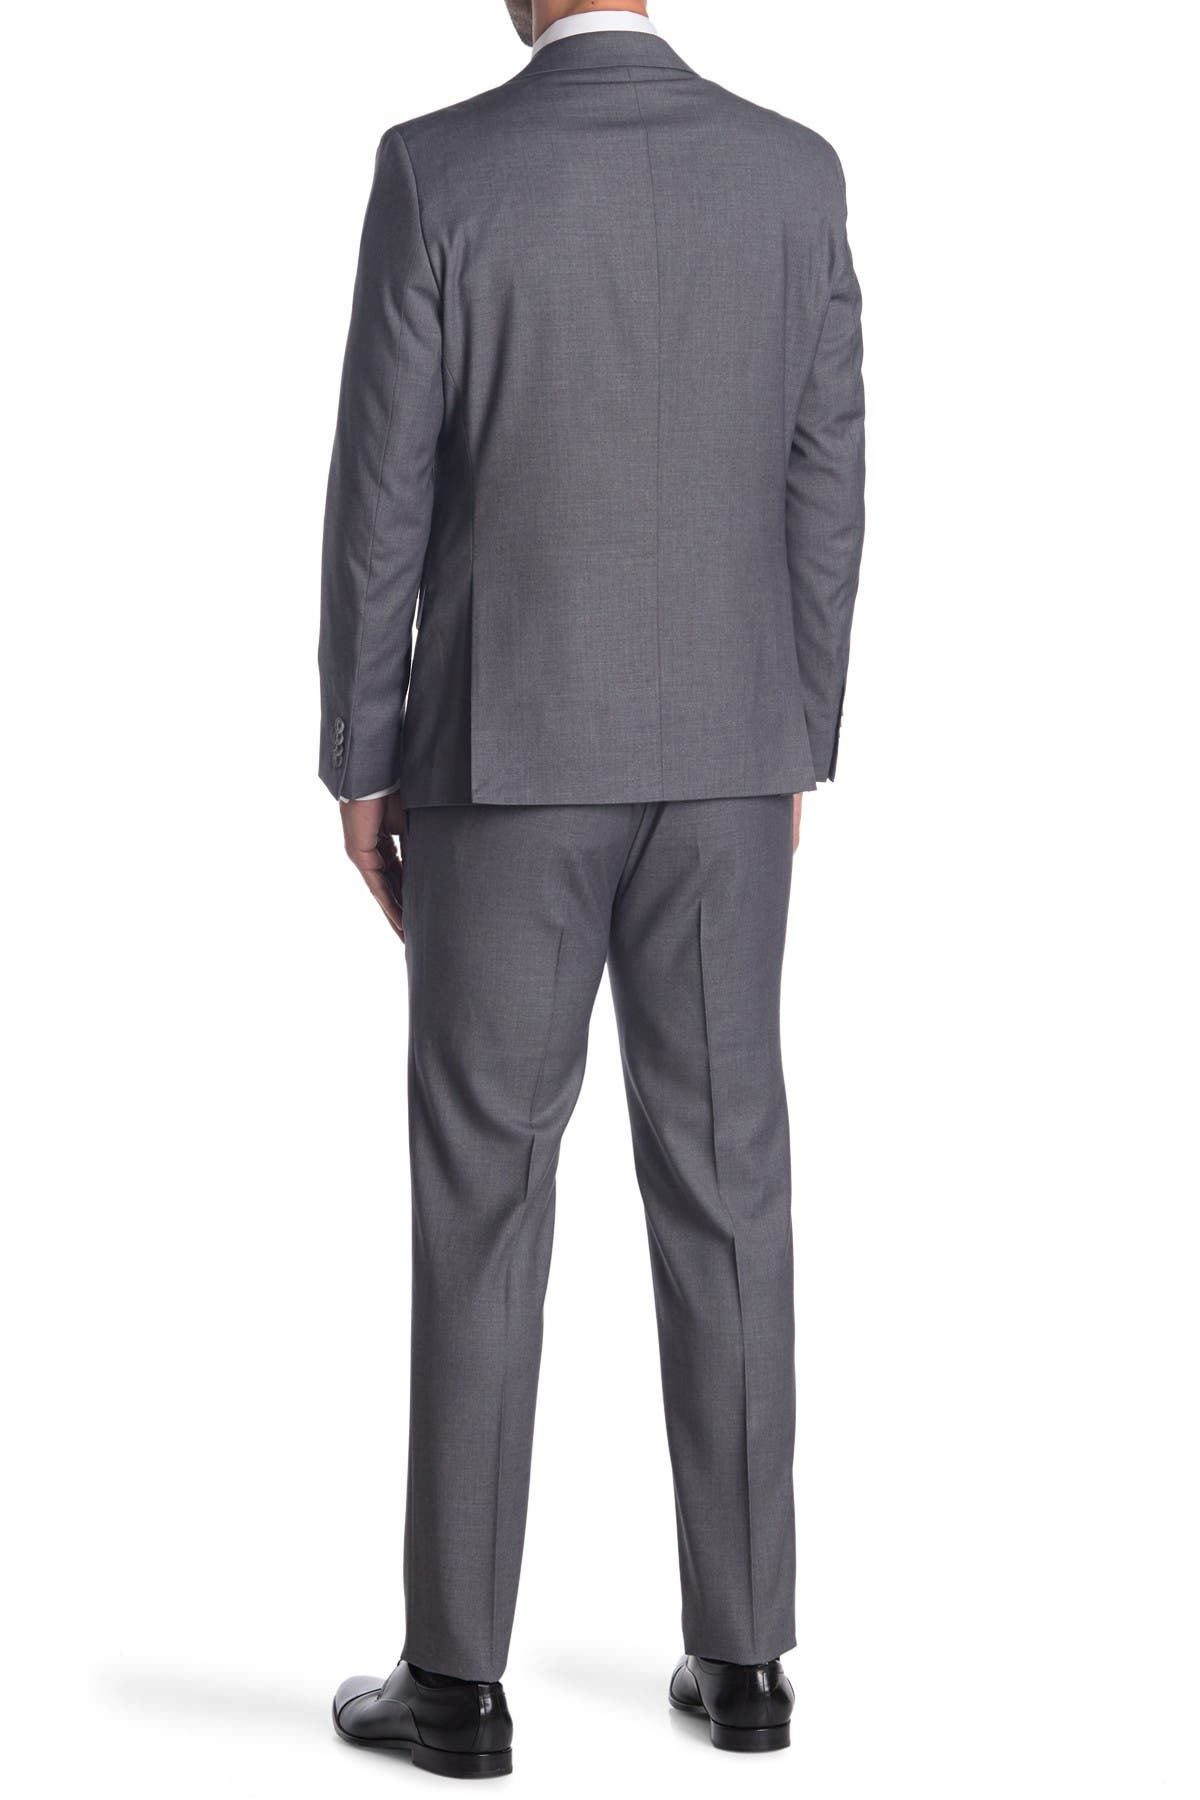 Kenneth Cole Reaction Grey Check Two Button Notch Lapel Slim Fit Suit In Medium Grey7